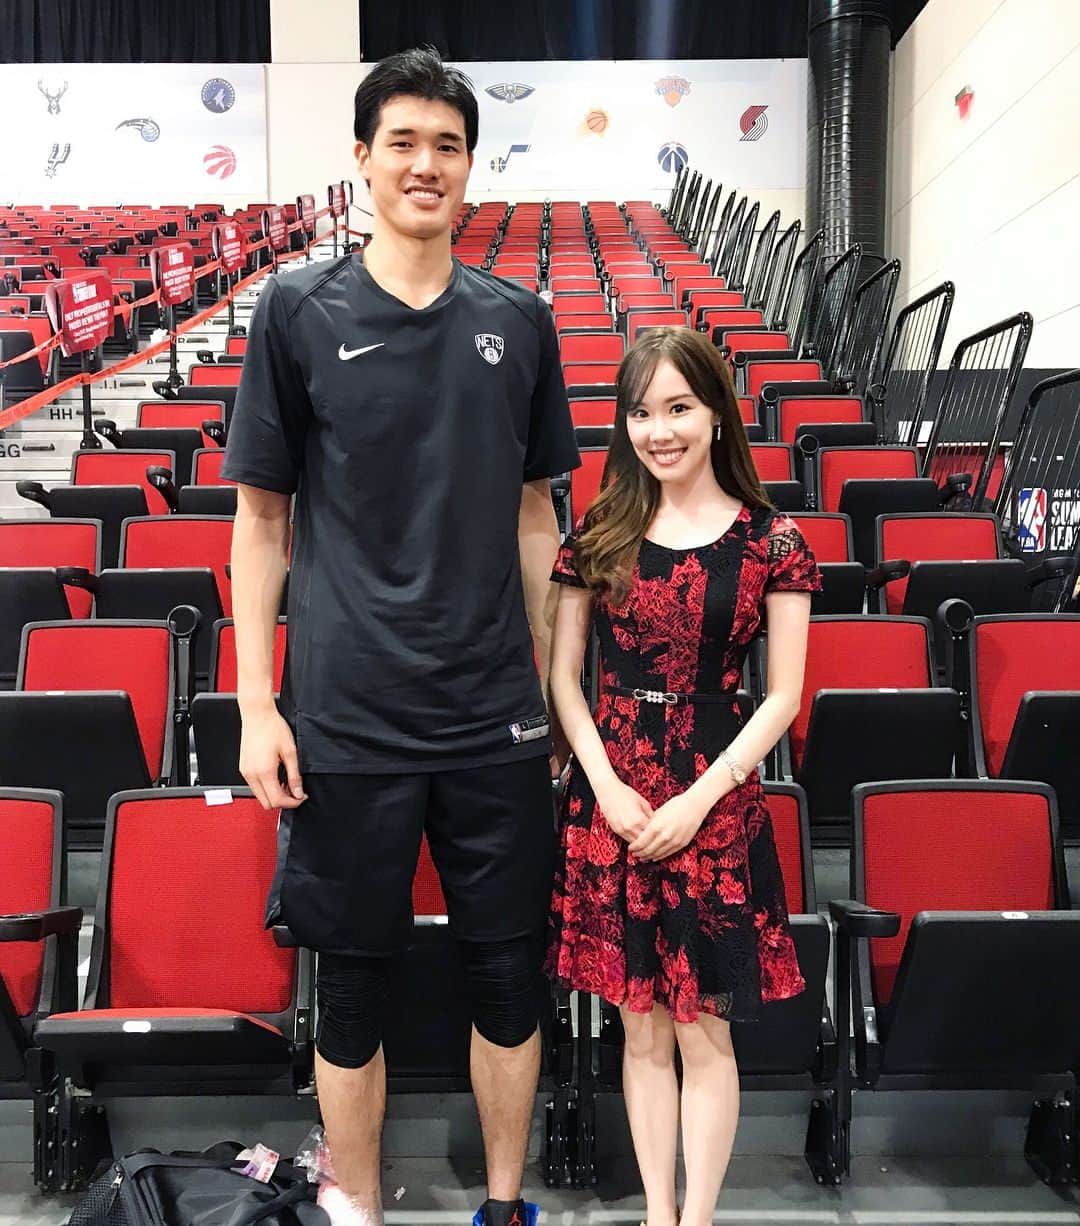 メロディー・モリタさんのインスタグラム写真 - (メロディー・モリタInstagram)「With the one and only Japanese player, Yuta Watanabe at NBA Summer League!!✨ Yuta is versatile on both ends of the ball being an elite shot blocker at 6’9” who is also skilled at shooting from the 3PT range.👌 His speed, length, and ability to play multiple positions on the floor makes him a phenomonal all-round player! I had the opportunity to interview him during his valuable time after the game where he shared about his personal journey and NBA experience thus far. Yuta is highly praised for his hard work ethic and mentality as well, and I could tell exactly why through his thoughtful words and down-to-earth personality. :) Keep your eyes pealed for more, and please continue to show Yuta Watanabe your support!!🙌 ラスベガスで行われている、NBAサマーリーグ！その中で、唯一の日本人としてブルックリン・ネッツでプレーしている渡邊雄太選手に単独インタビューをさせて頂きました!!🏀 身長206cmを活かした高いディフェンス力はもちろん、3ポイントシュートも得意とし、スピードも武器と言う、いくつものポジションをこなせる素晴らしいオールラウンドプレーヤーです✨ 試合後の貴重なお時間を頂き、NBAサマーリーグでの戦いについて、そしてプライベートのお話まで伺いました。渡邊選手の丁寧な受け答えに、努力家で真面目と言われているお人柄が良く分かるインタビューとなりました。今後も渡邊選手への応援をどうぞ宜しくお願い致します！😊 #NBA #NBAsummerleague #MelodeeMoritaInterviews #yutawatanabe #rakutentv #rakuten #rakutennba32 #melodeeinvegas #渡邊雄太 #サマーリーグ #楽天 #楽天TV #ラスベガス」7月11日 5時10分 - melodeemorita